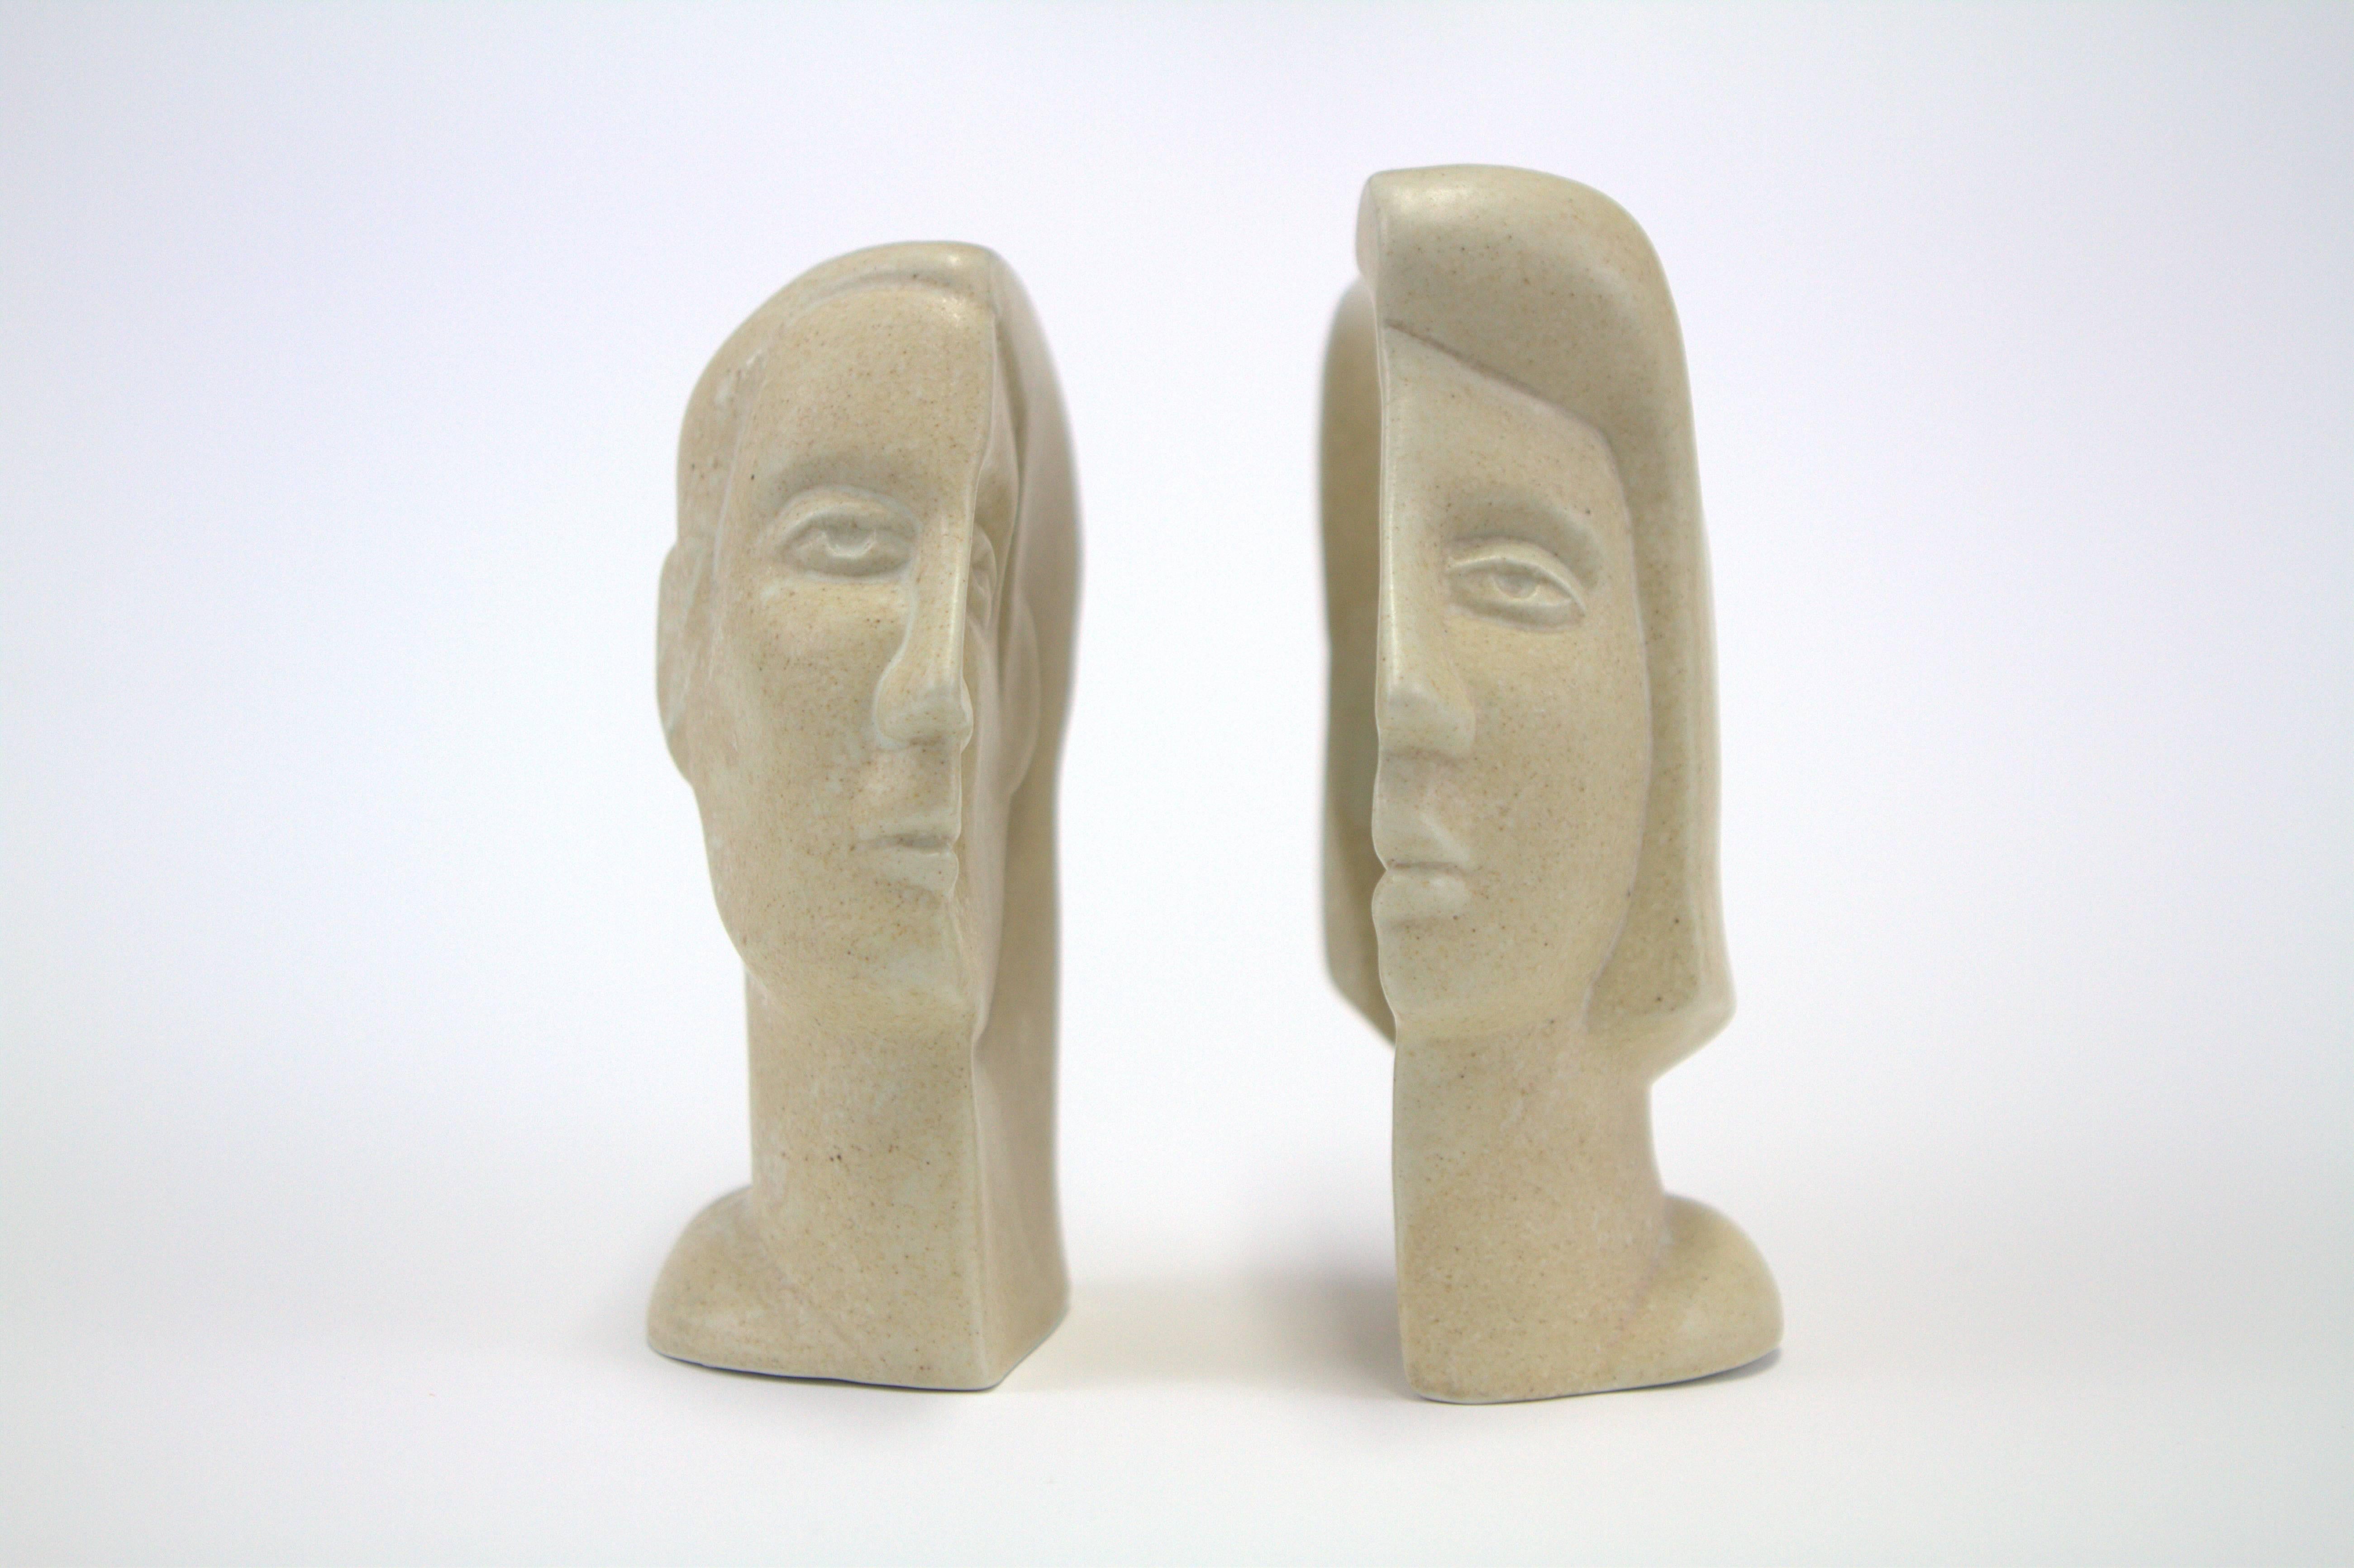 Fascinating interlocking male and female busts by Peter Wright (1919-2003). Slip cast porcelain with mottled glaze, signed 